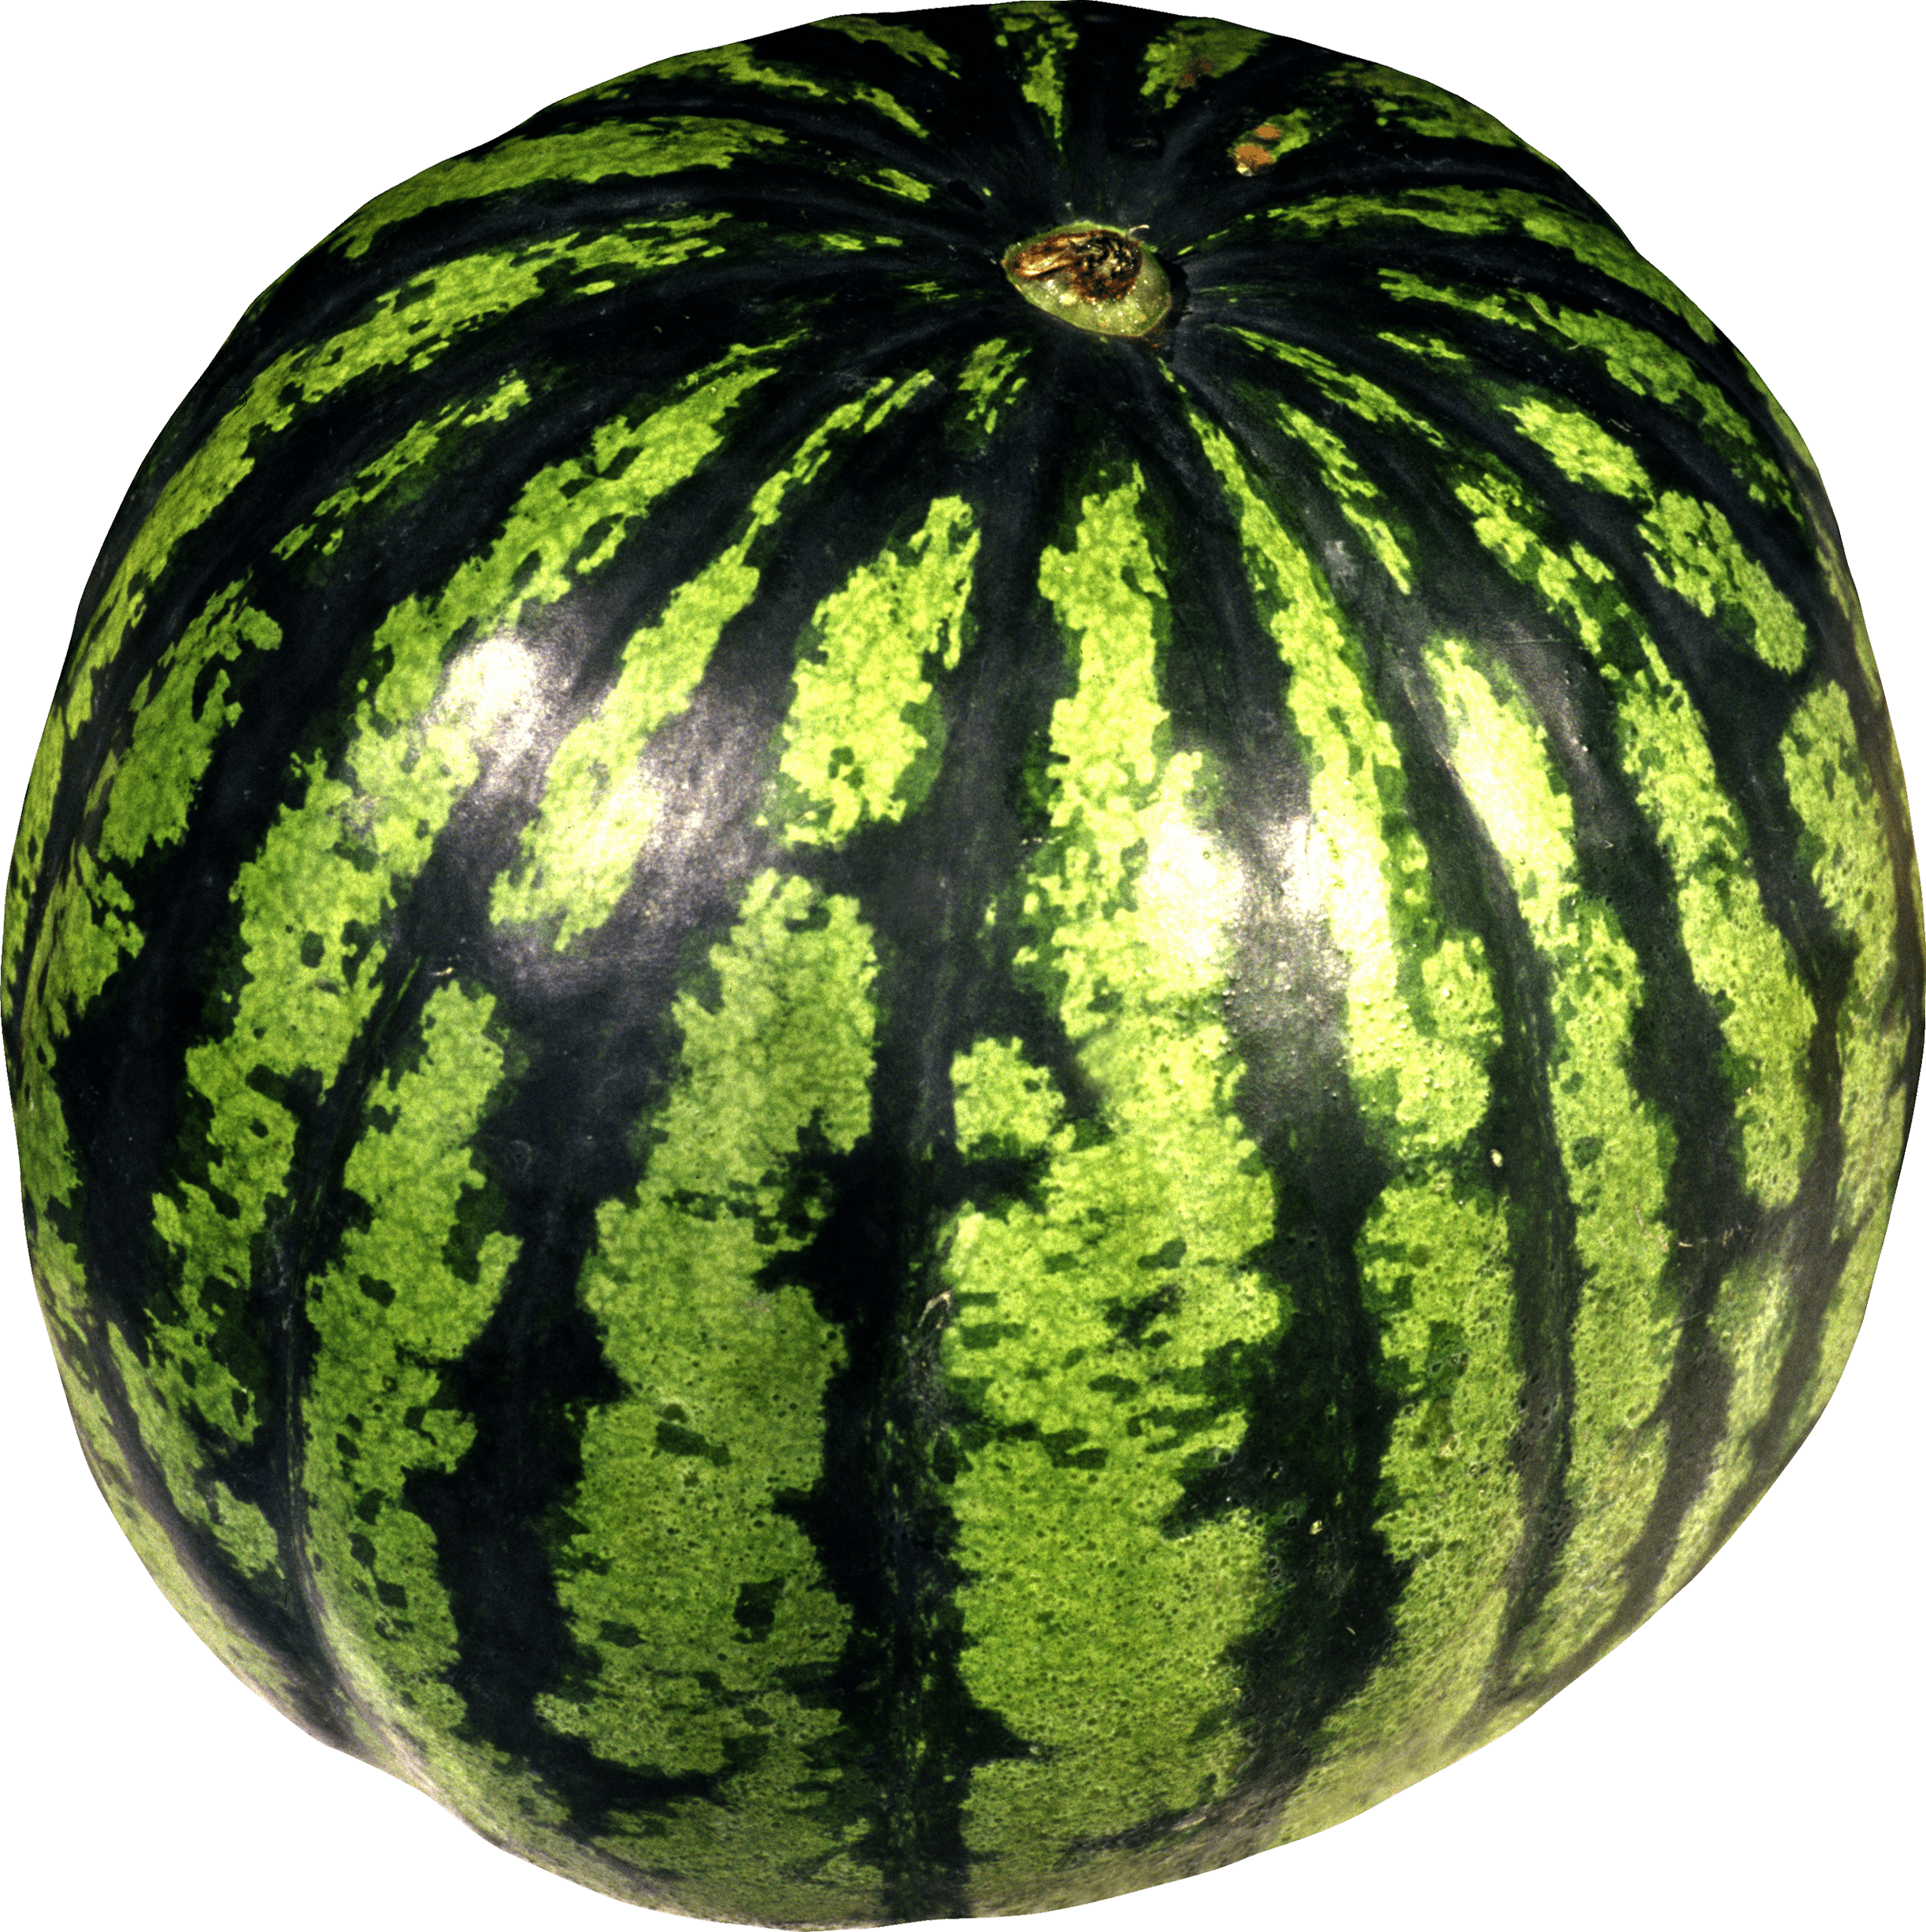 Large Isolated Watermelon